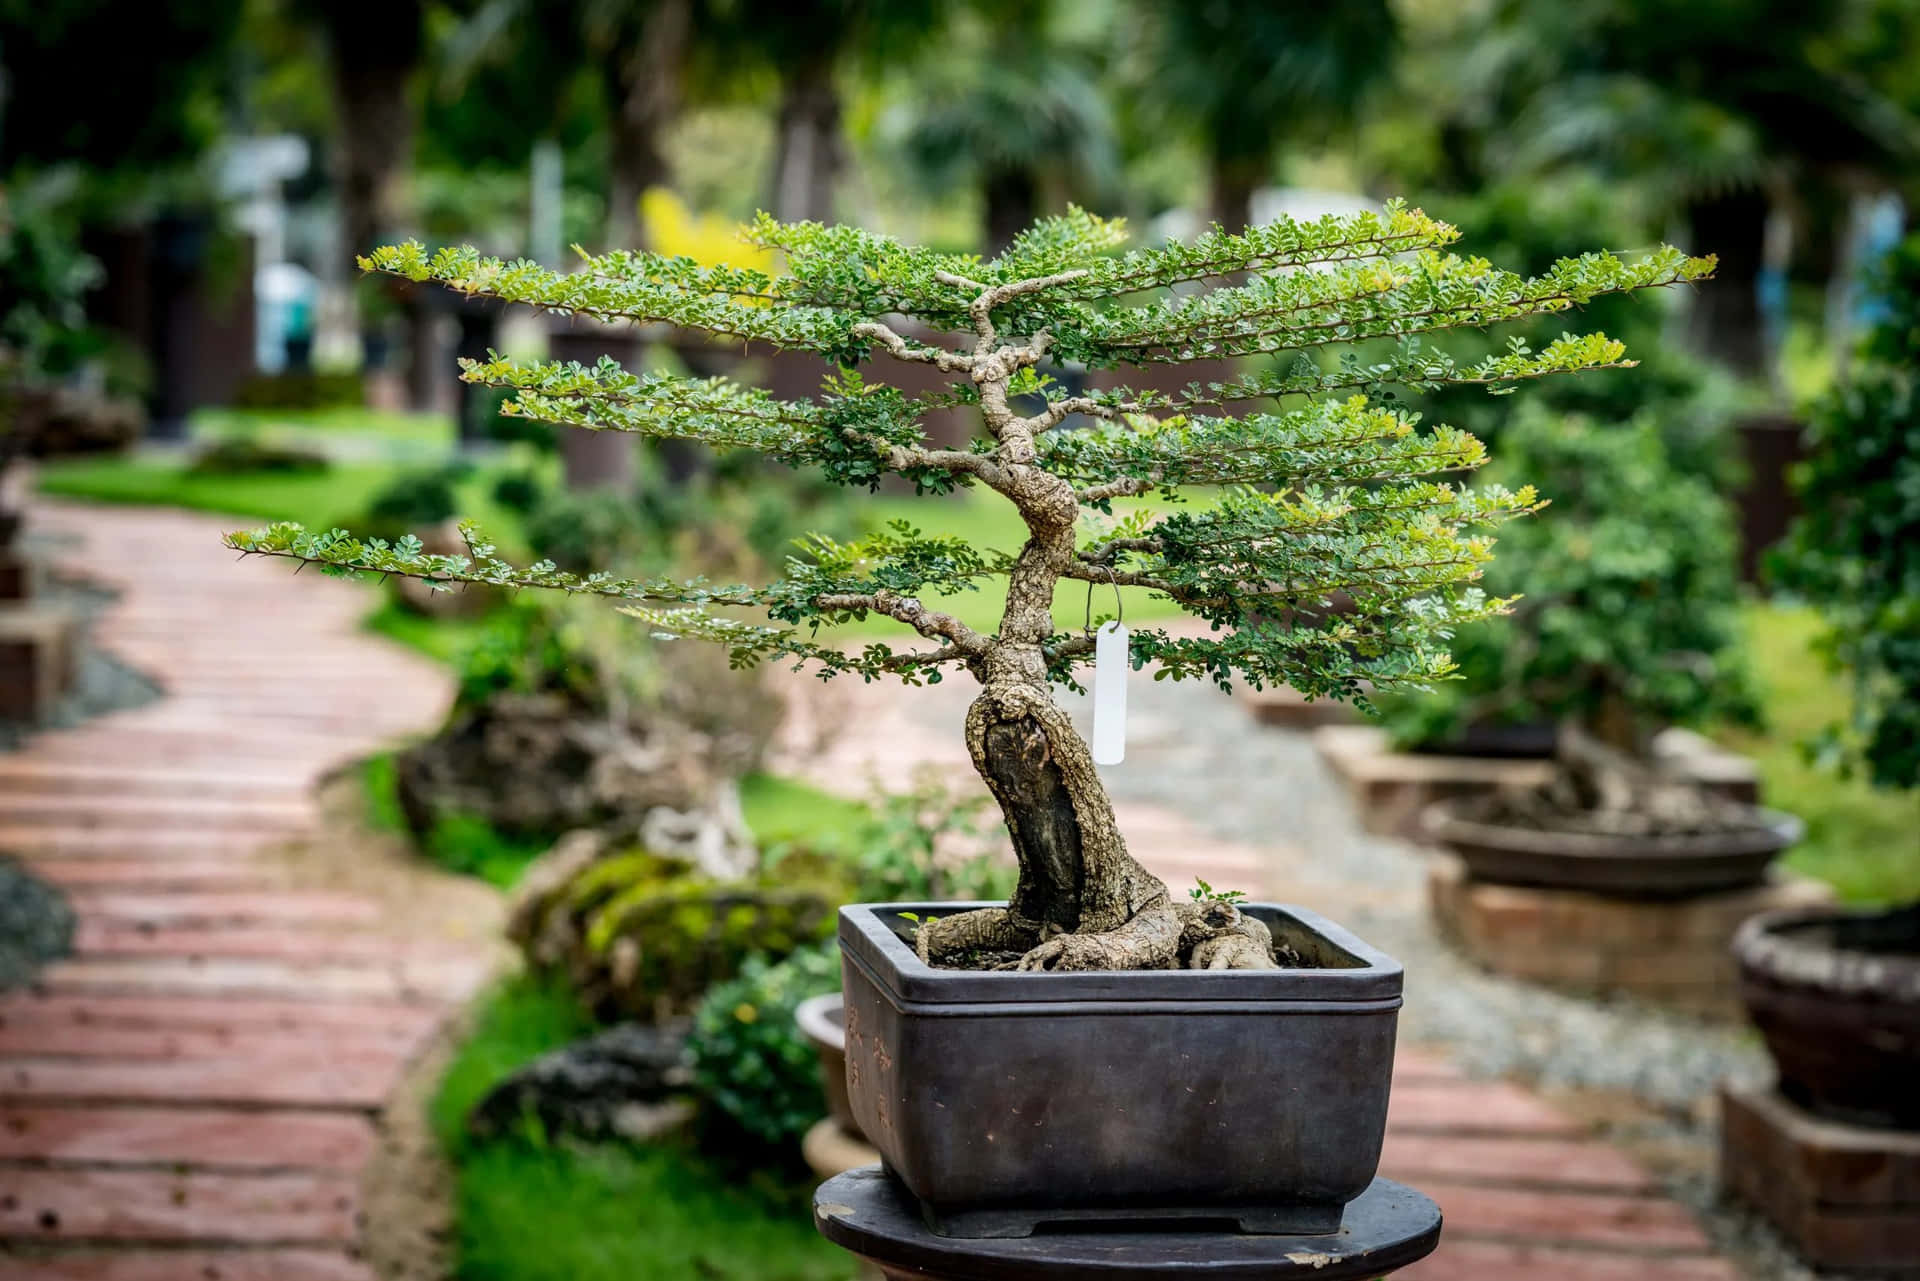 Bonsai Tree In A Pot On A Wooden Table